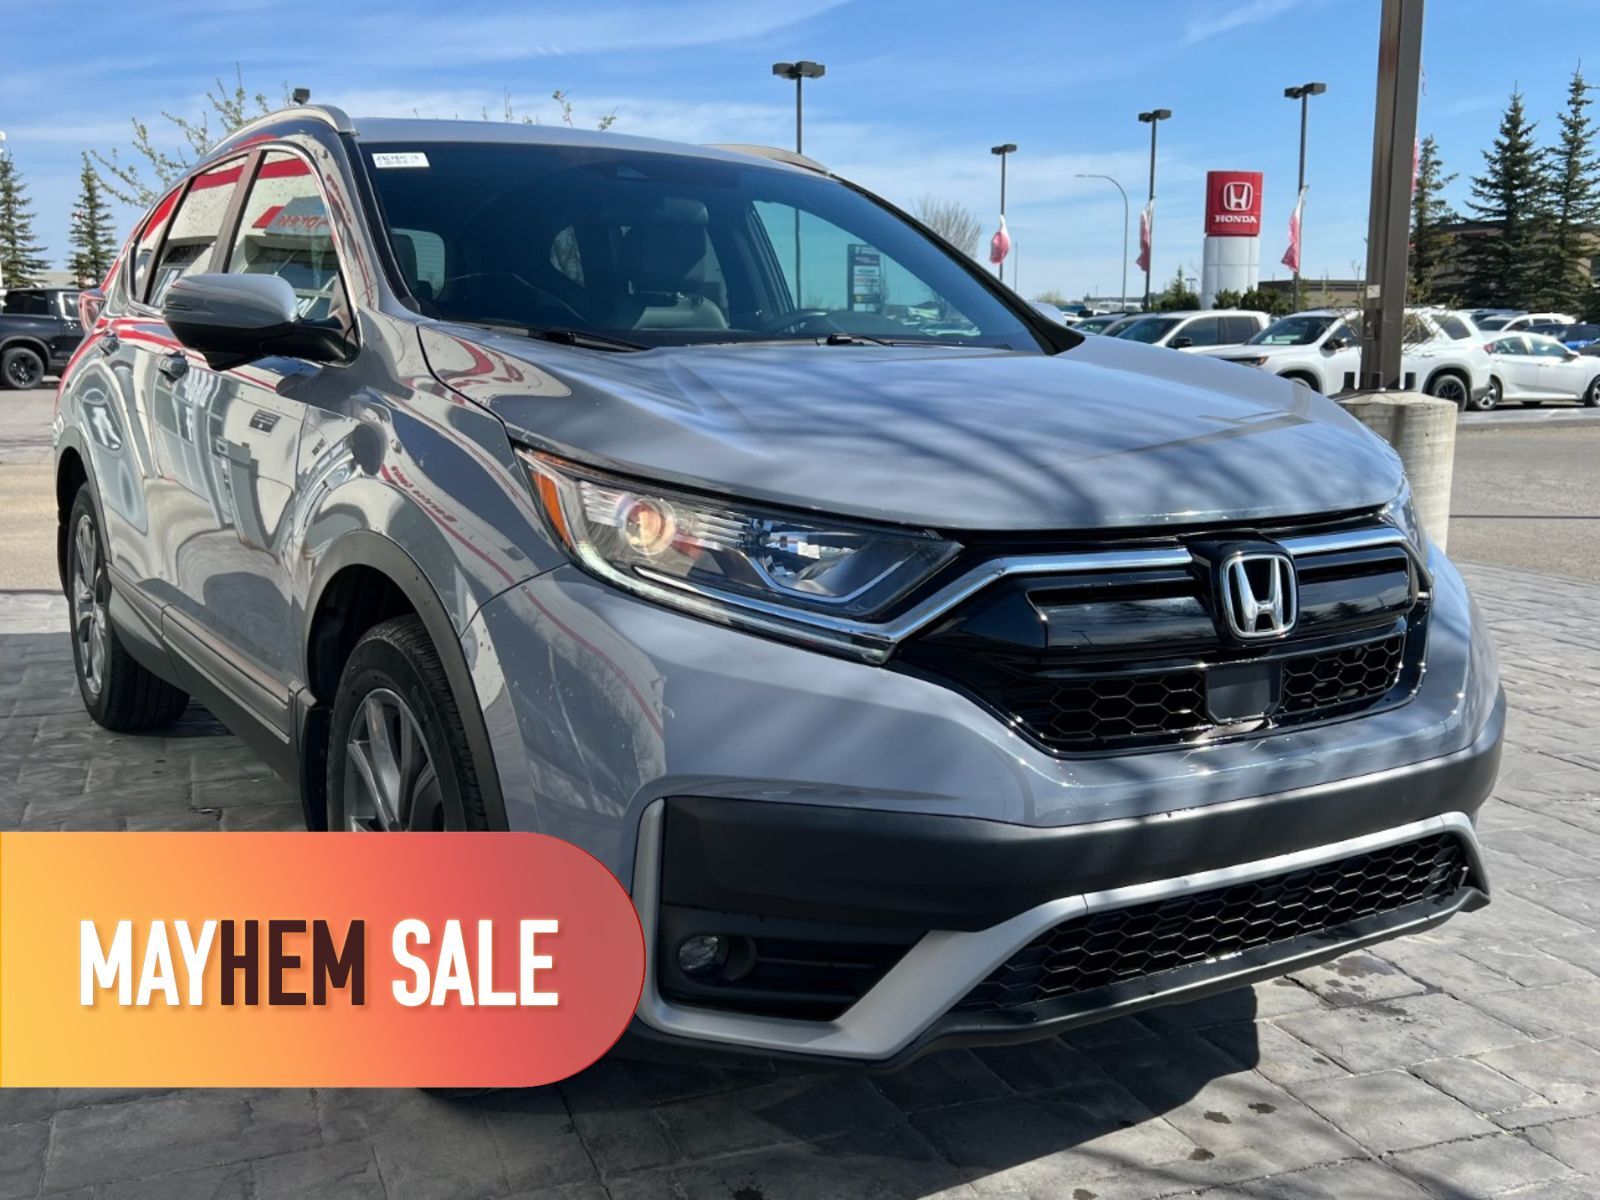 2022 Honda CR-V SPORT: No Accidents, One Owner, Dealer Maintained!